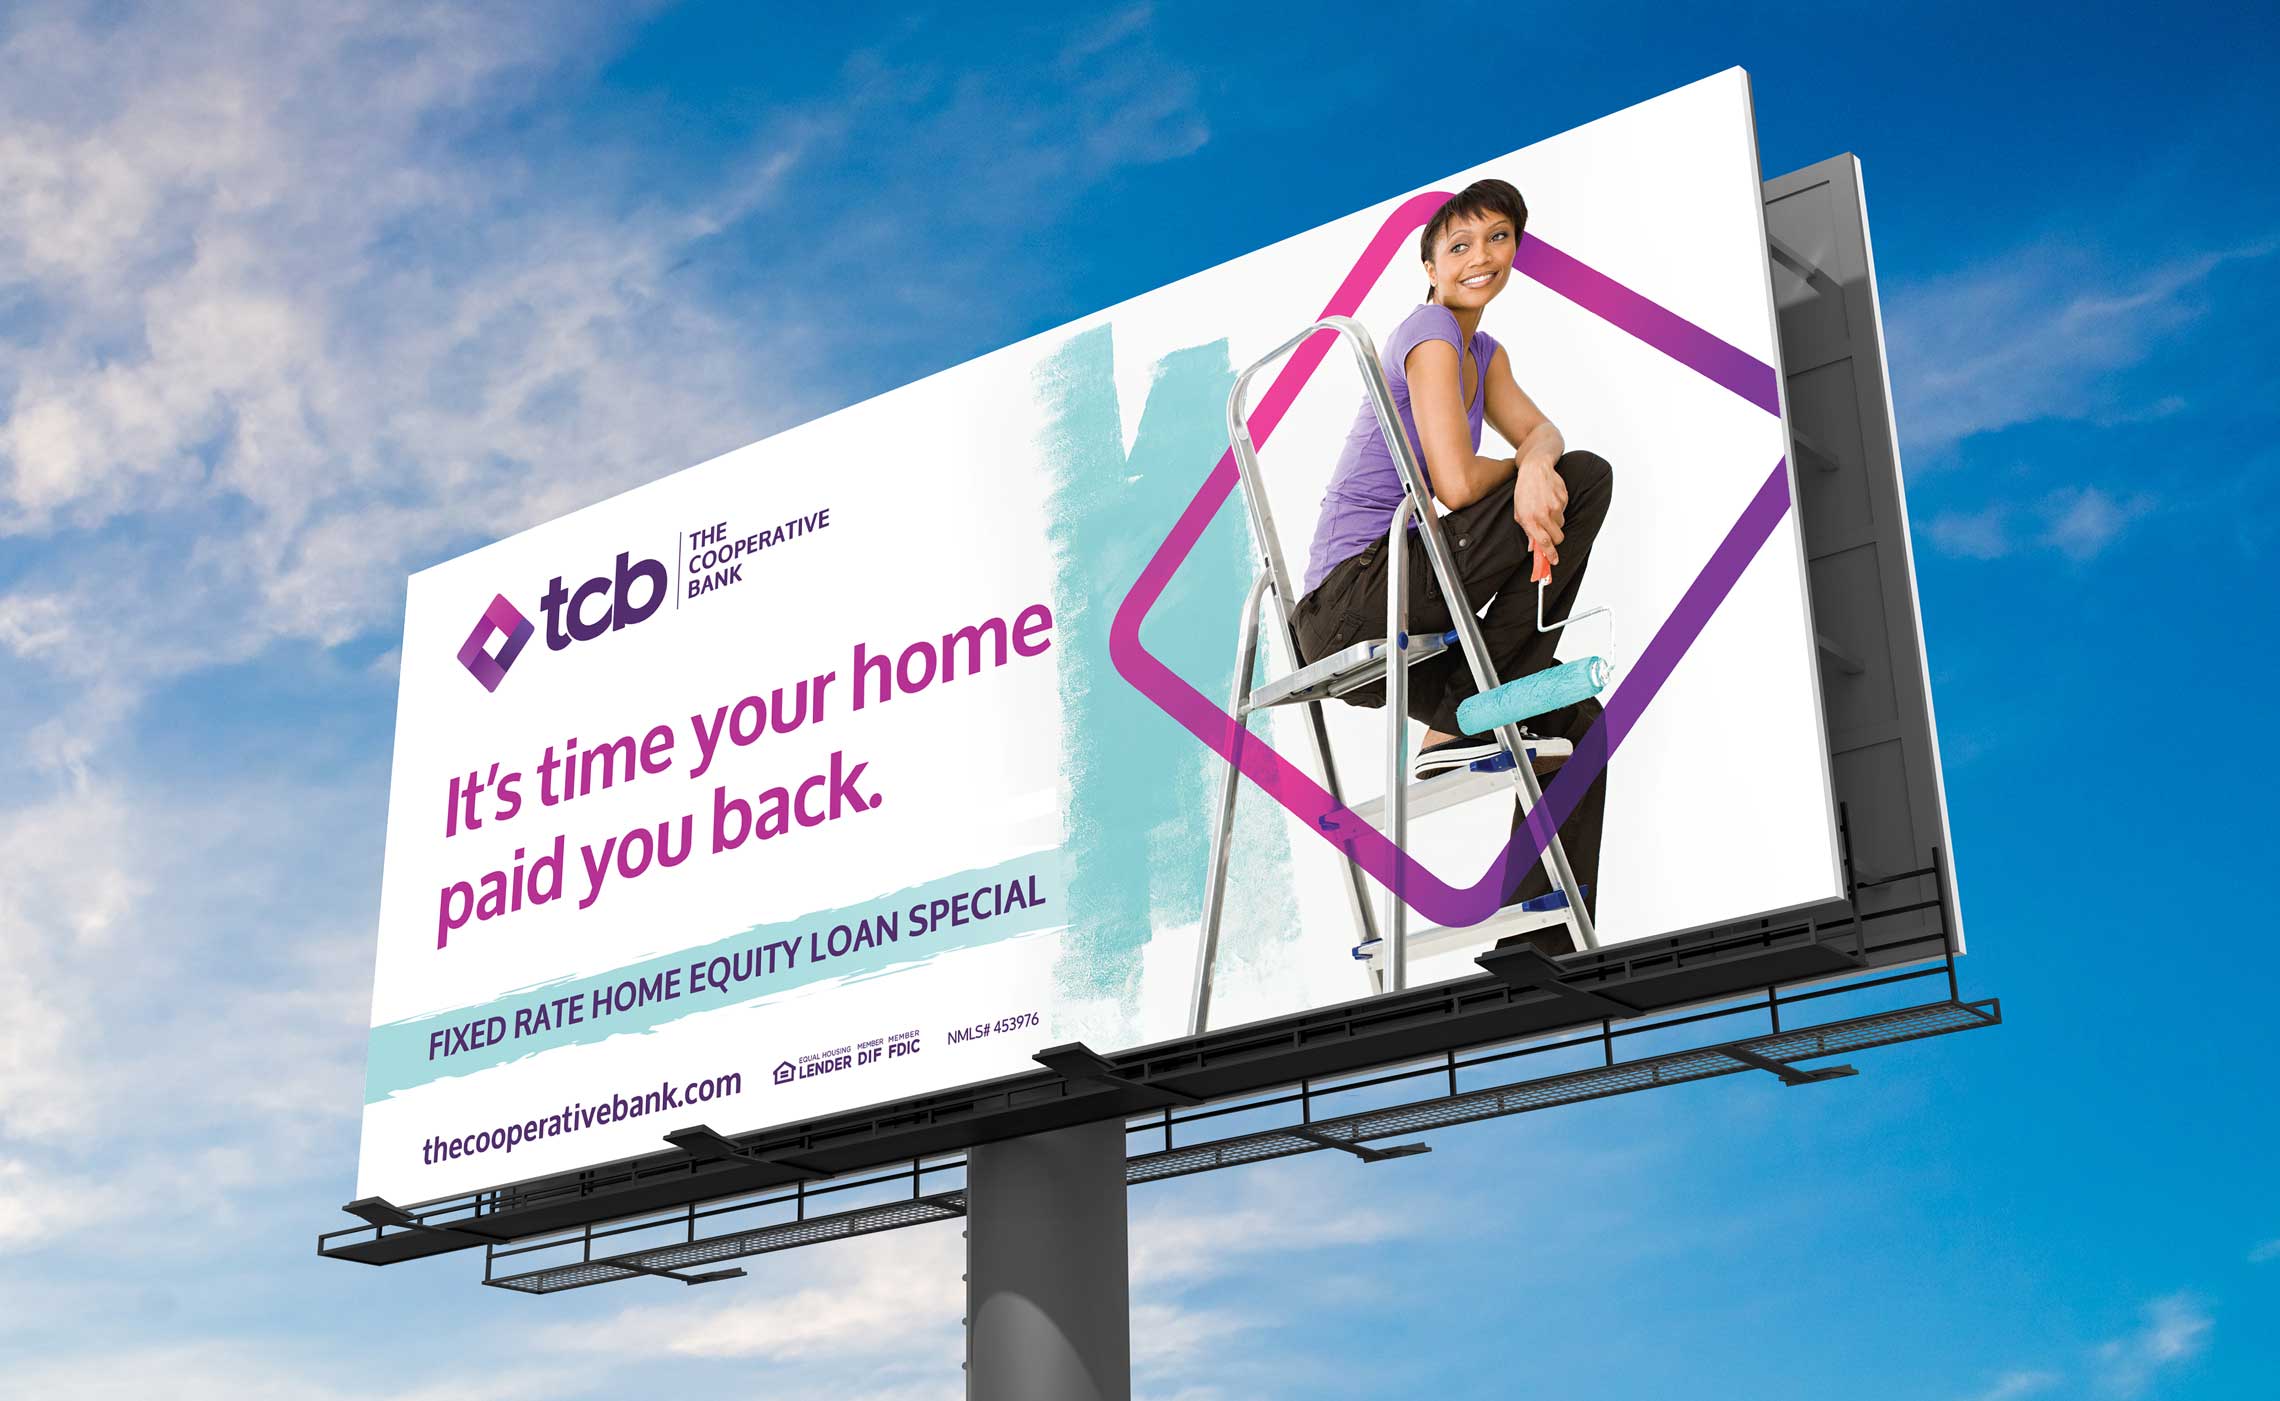 tcb billboard with sky and clouds behind